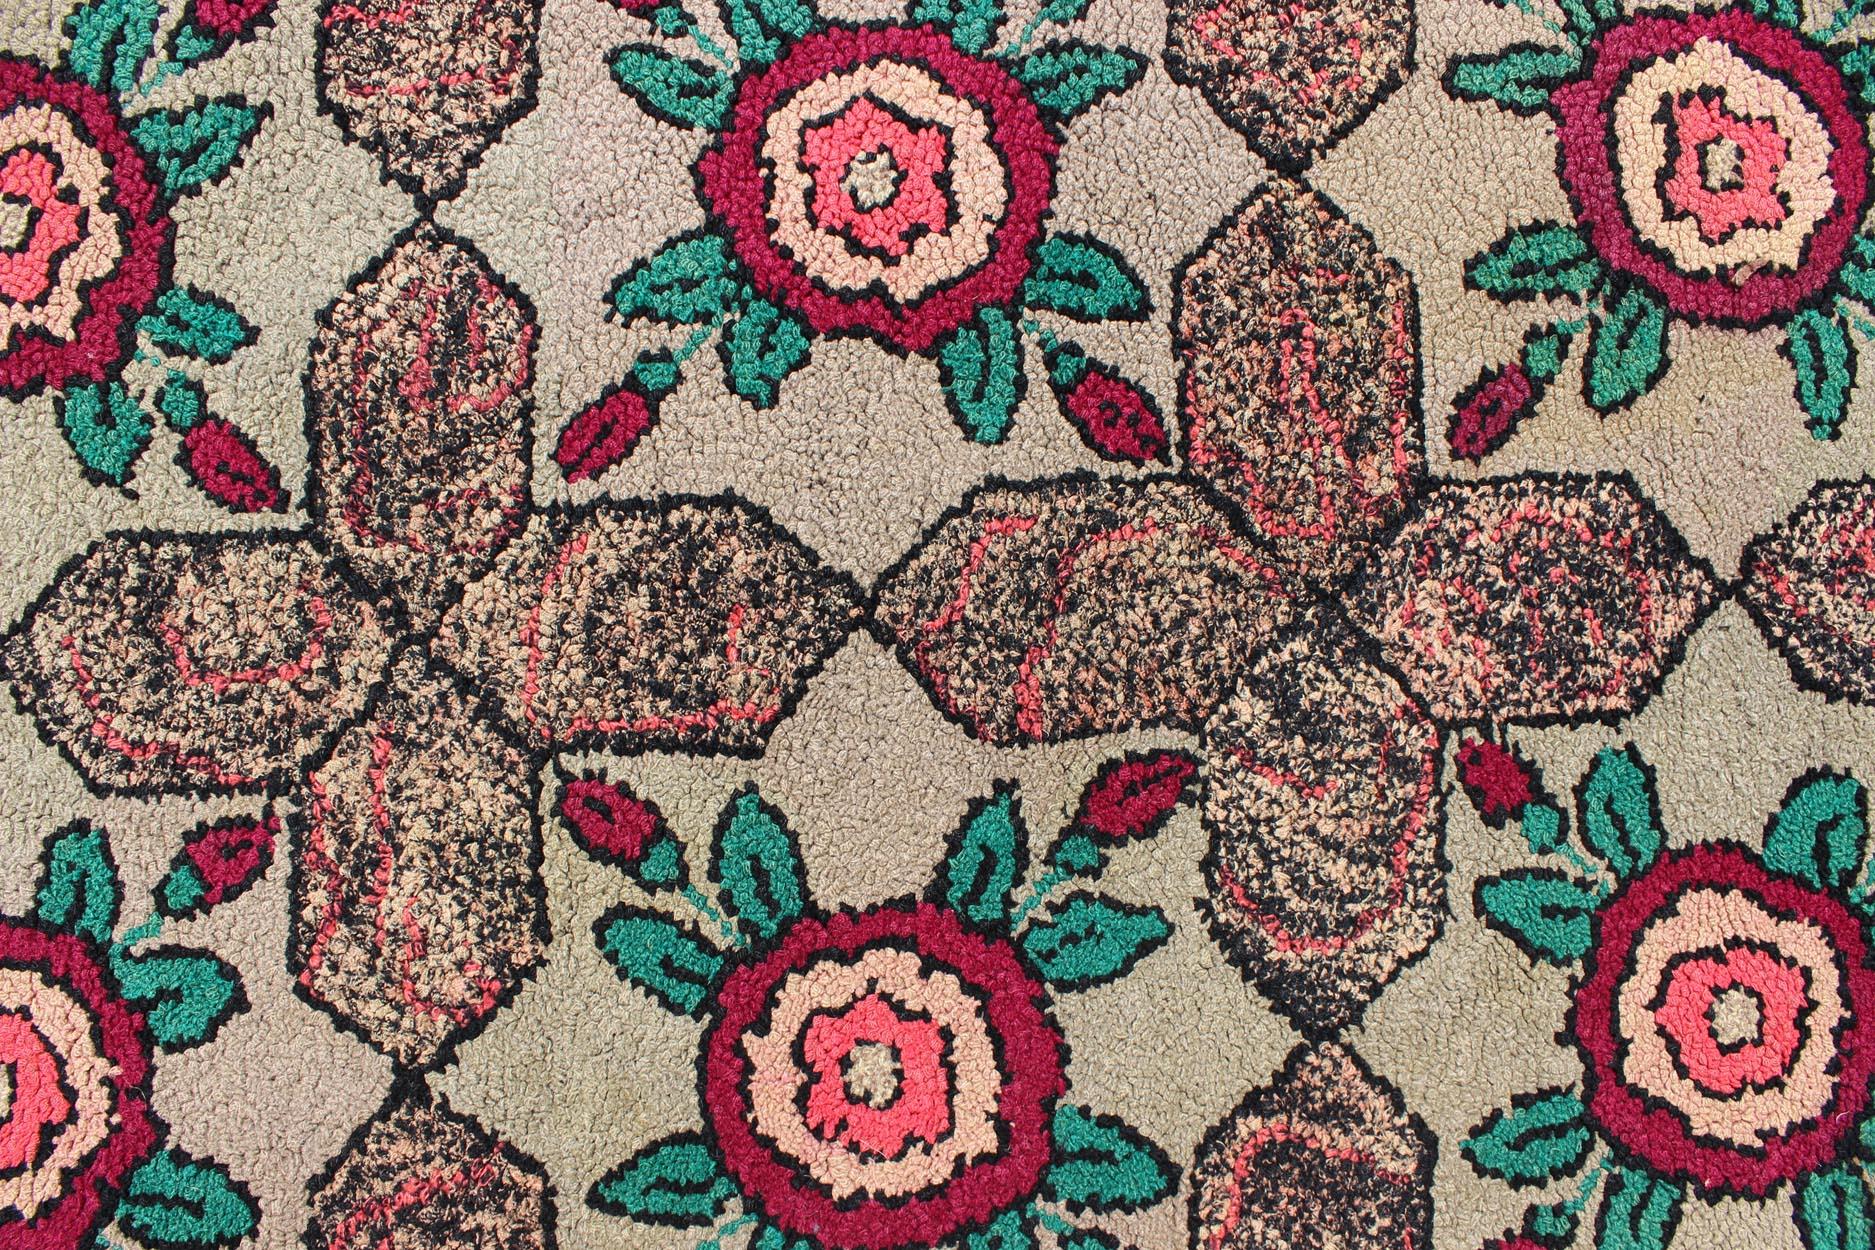 Repeating Floral-Leaf Design American Hooked Rug in Brown, Green, and Red In Good Condition For Sale In Atlanta, GA